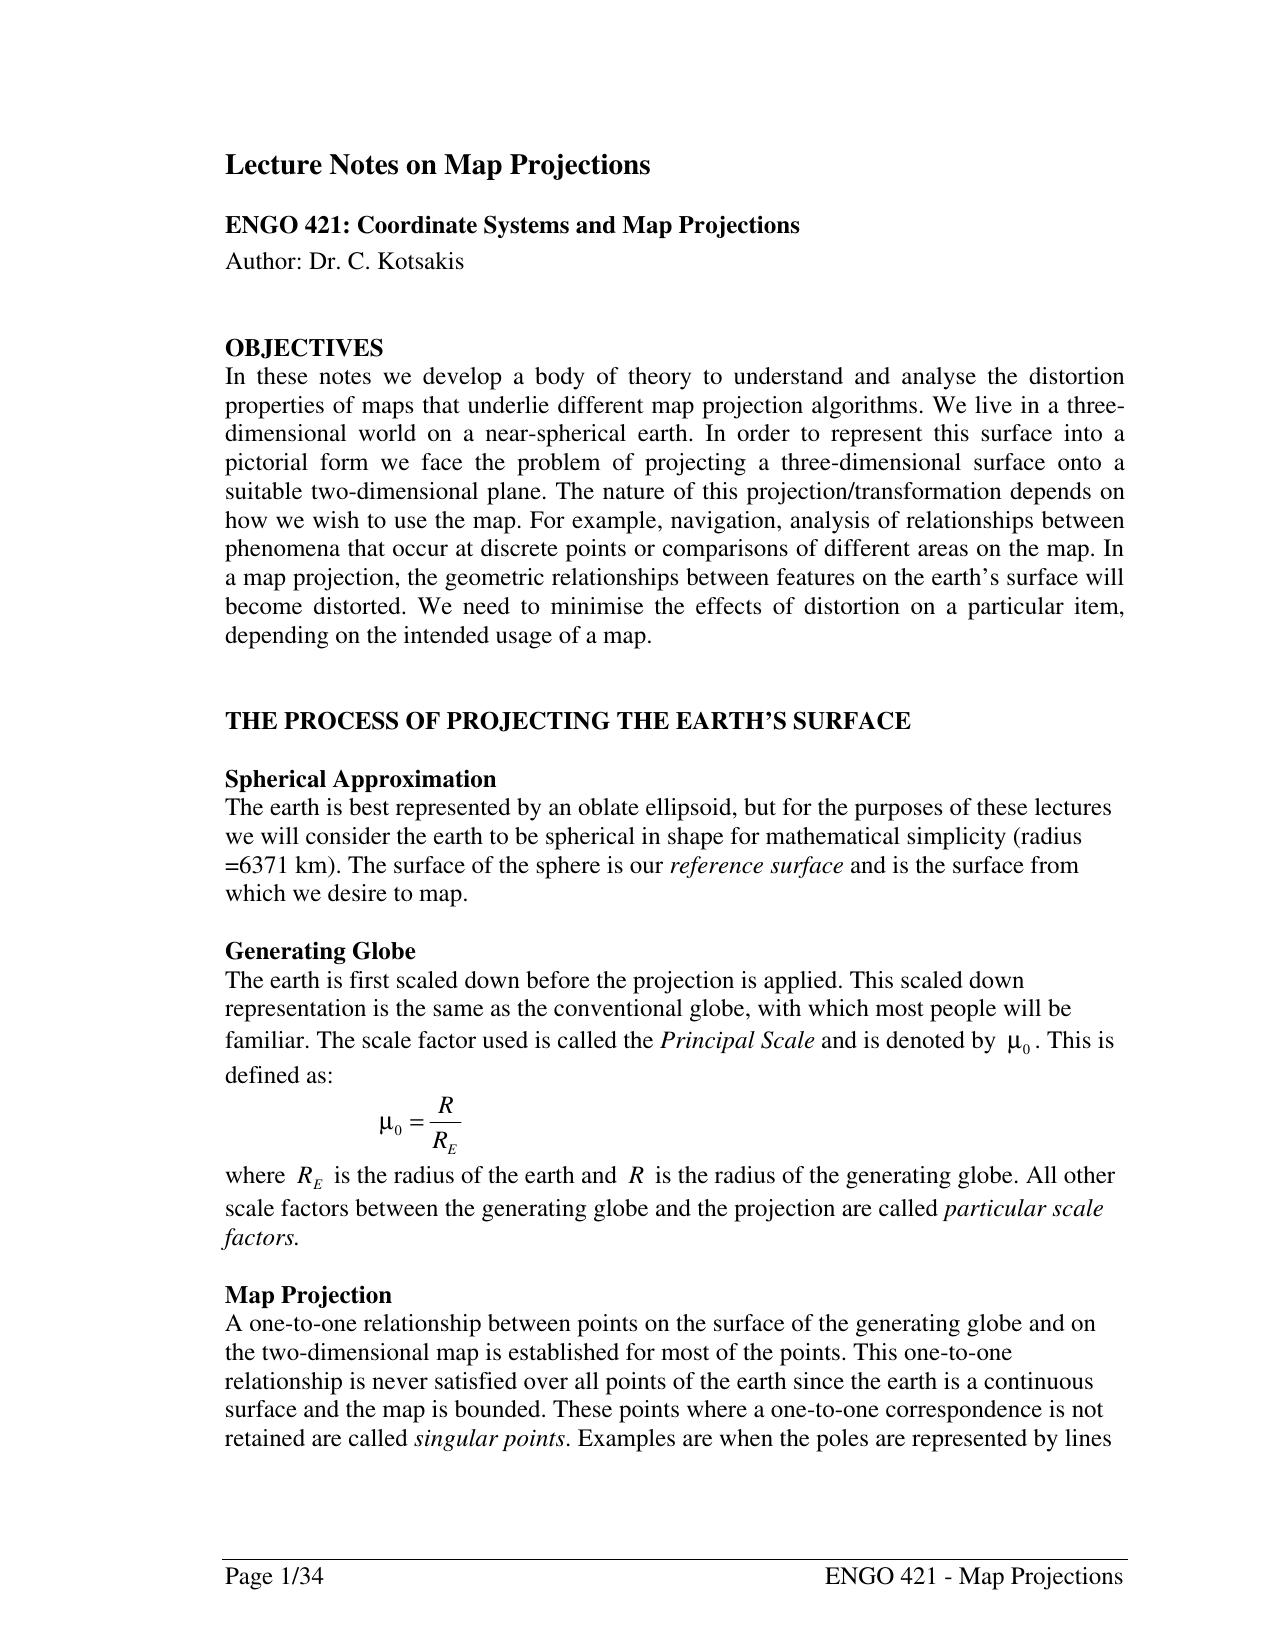 Lecture Notes on Map Projections _ENGO 421_.PDF